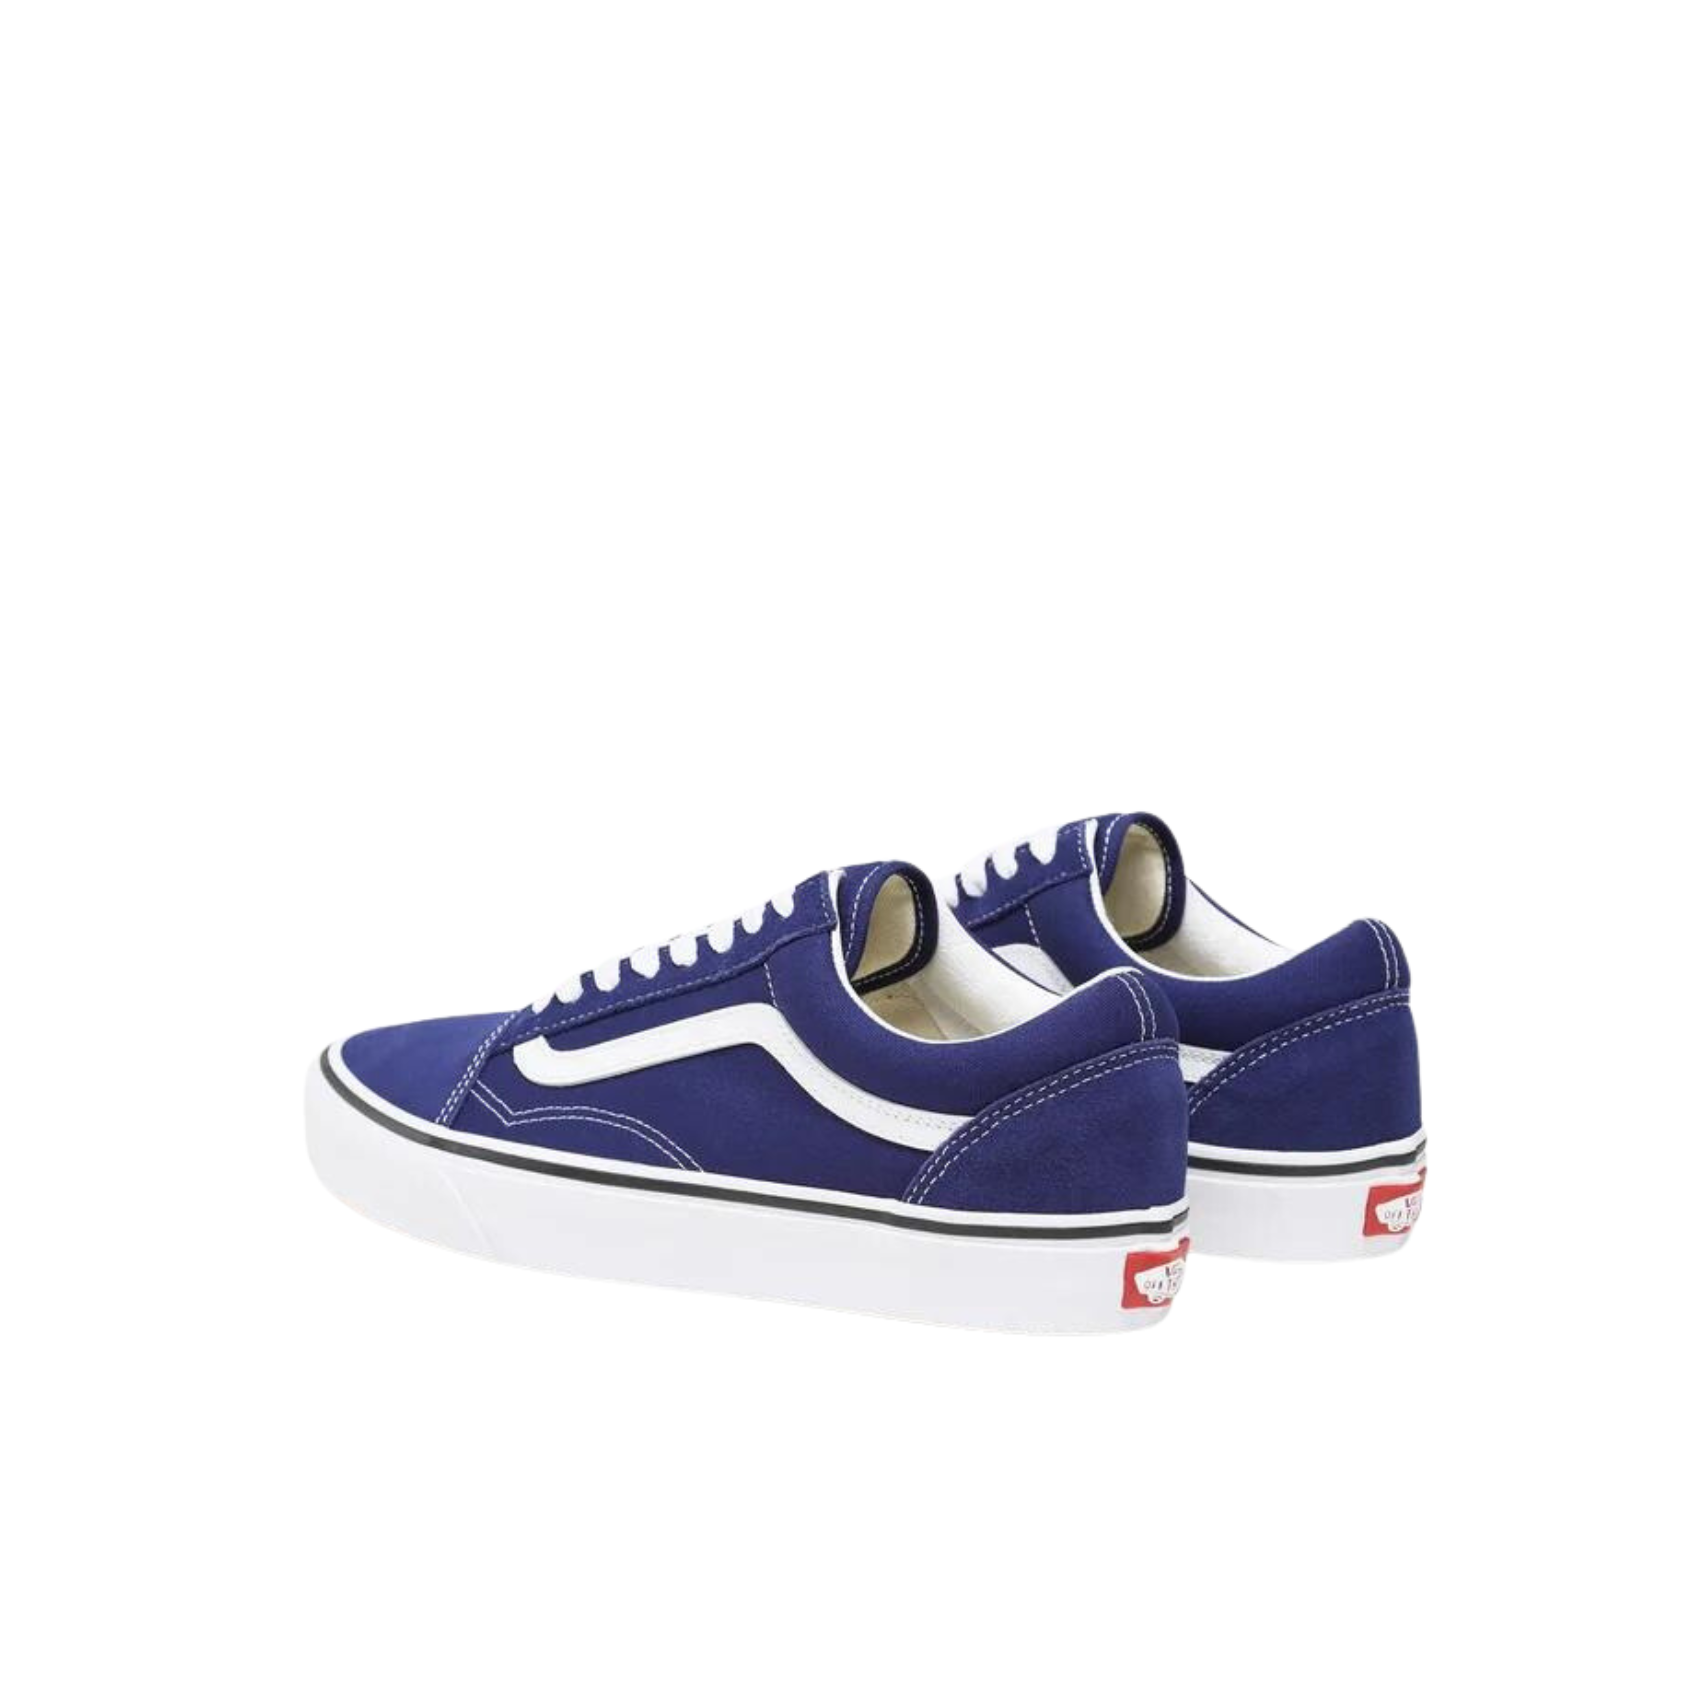 Old Skool - Color Theory Beacon Blue